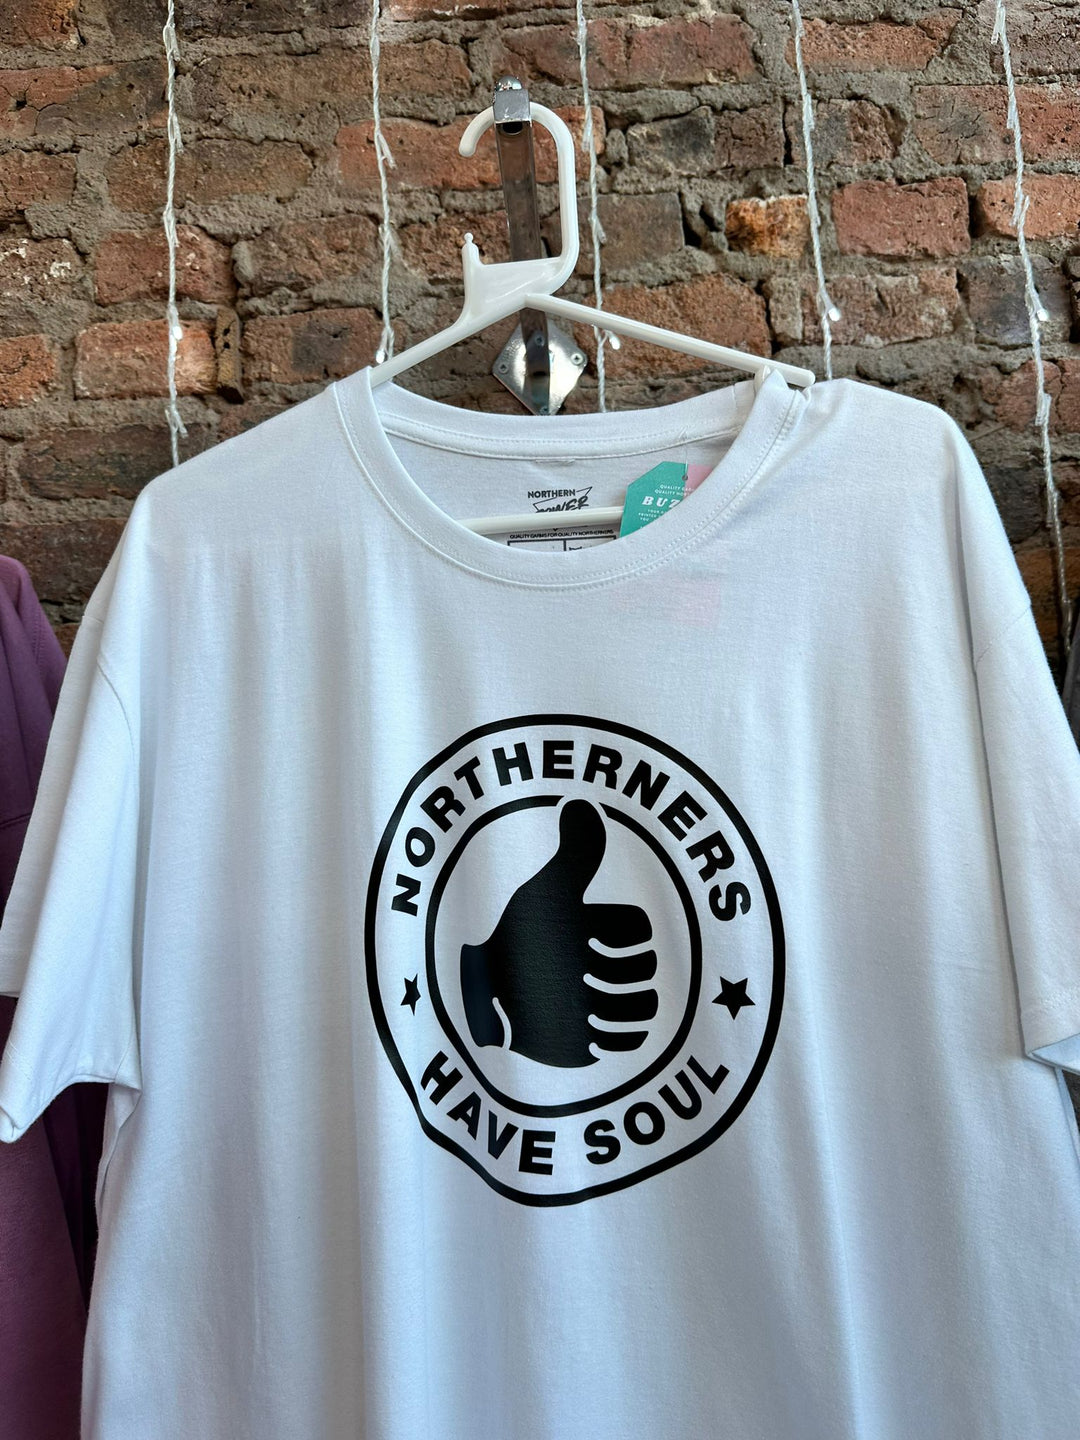 *Northerners Have Soul White Tee - 2XL and 4XL